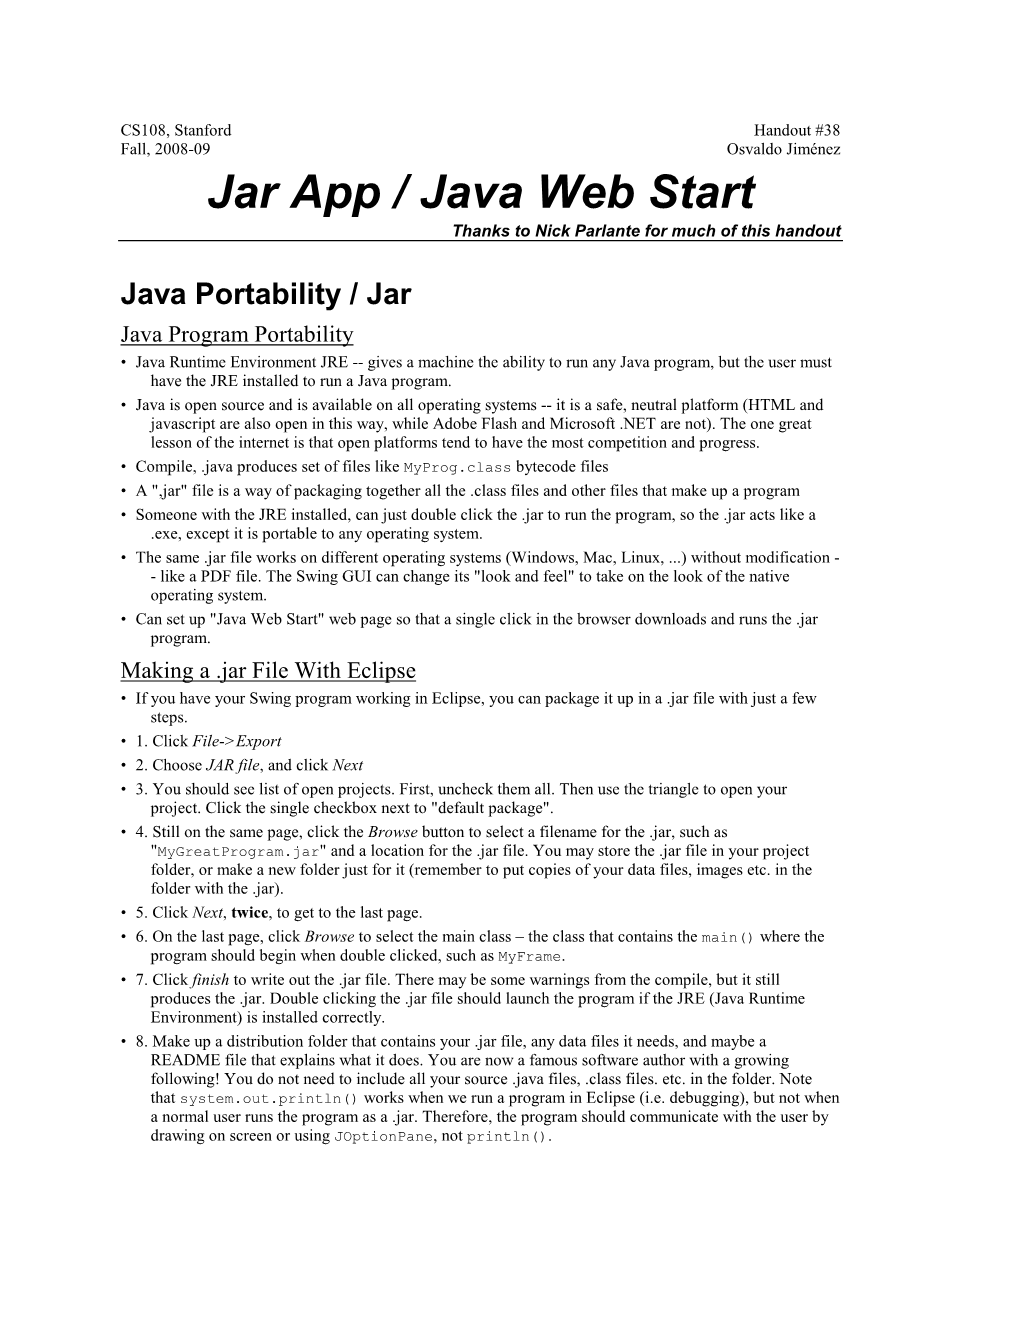 Jar App / Java Web Start Thanks to Nick Parlante for Much of This Handout